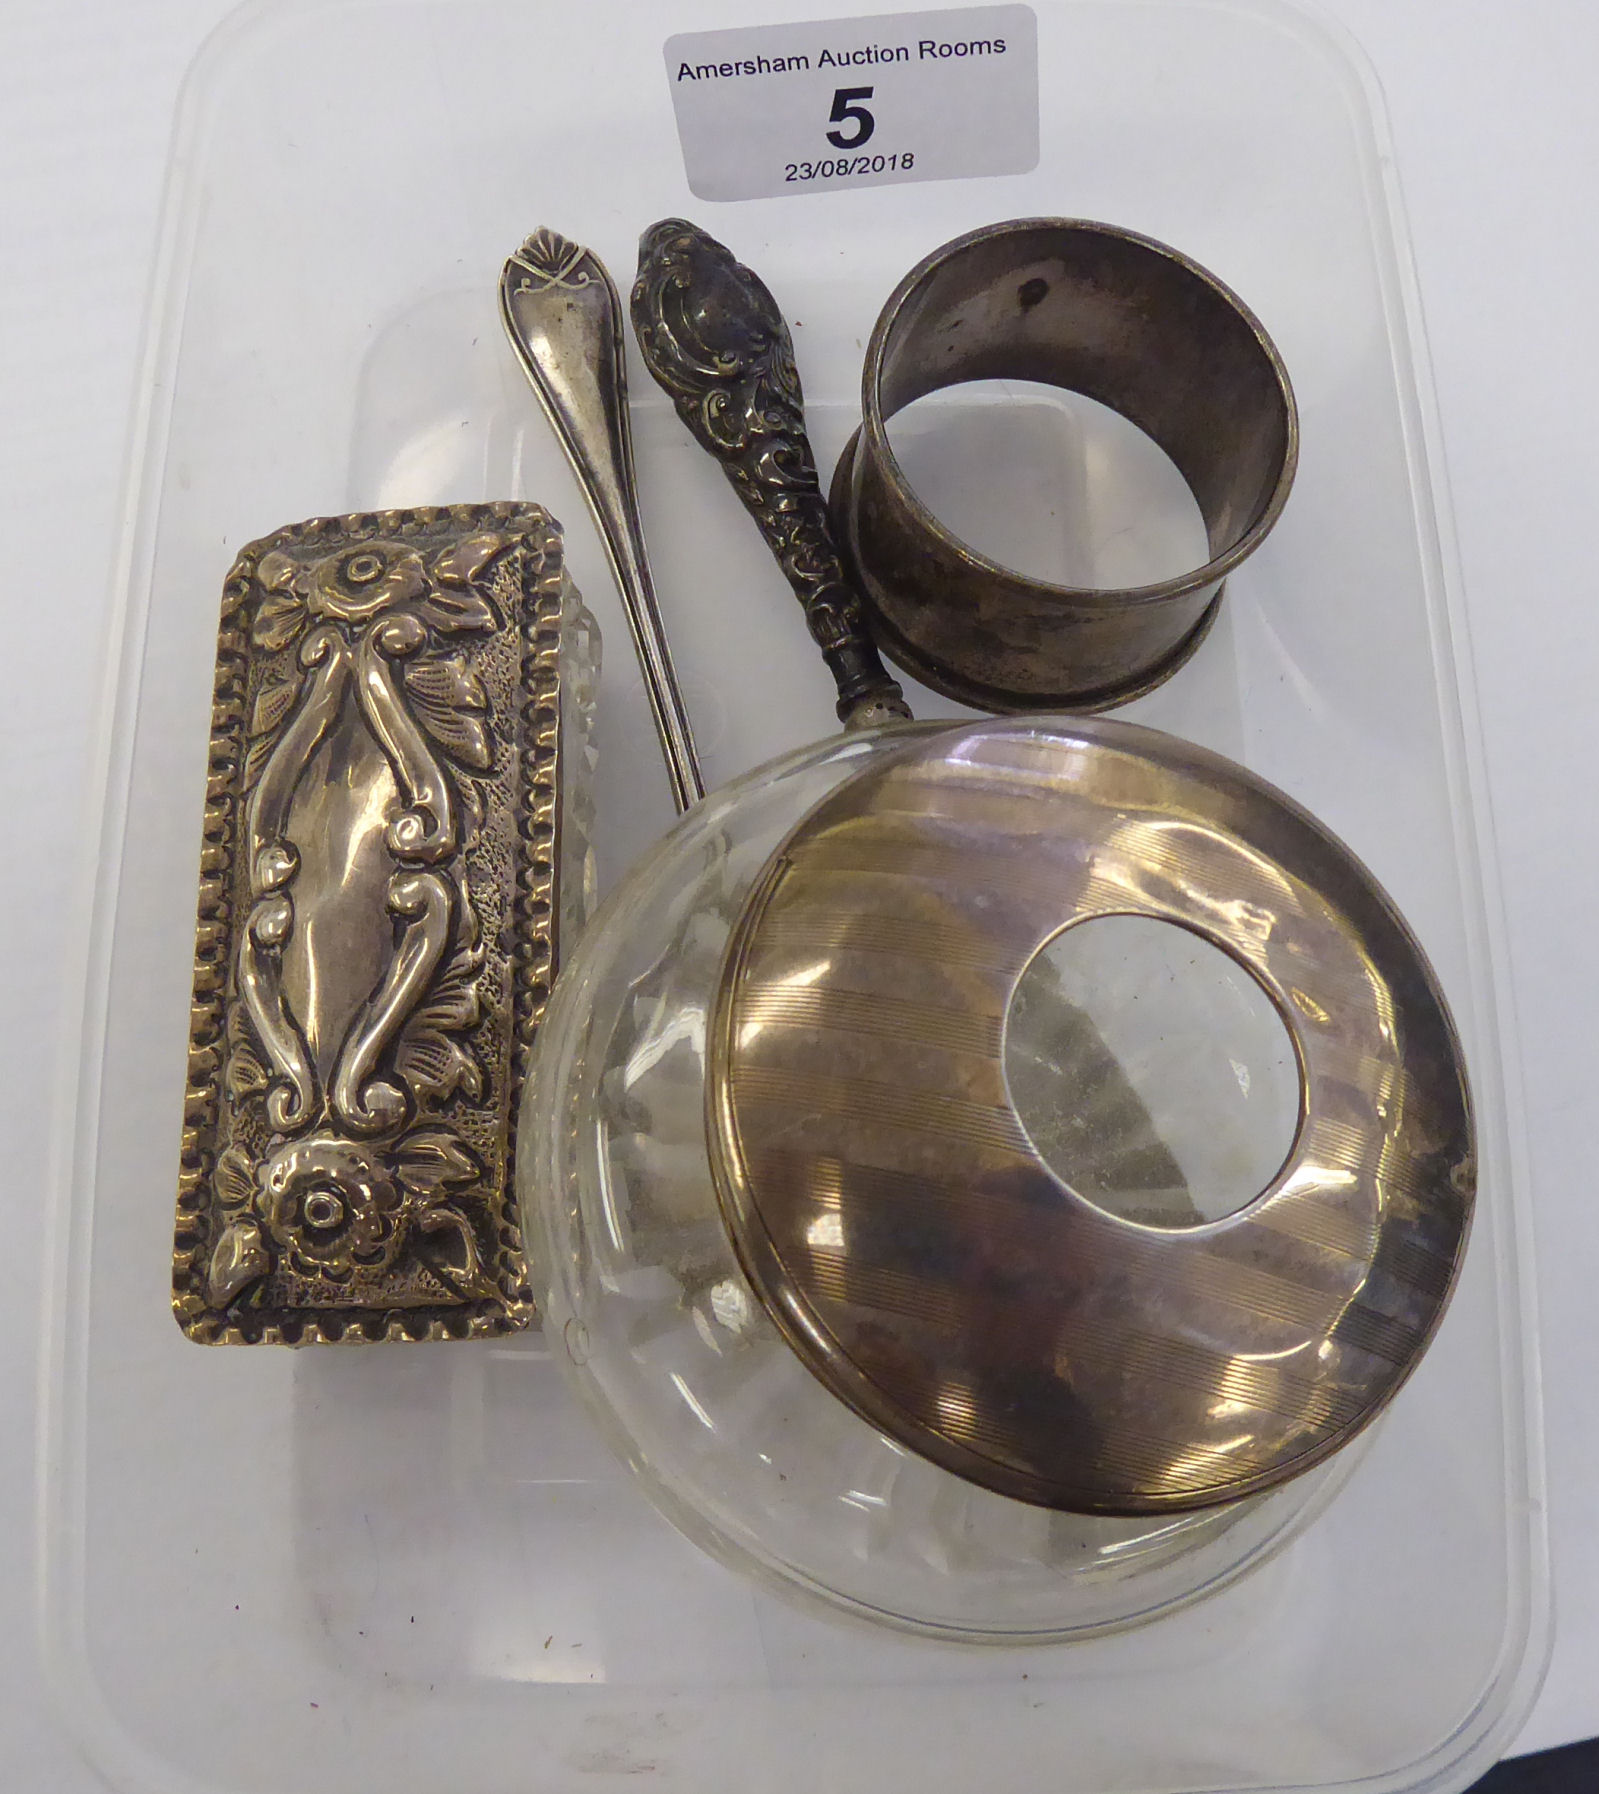 Silver items: to include a napkin ring and conserve spoons mixed marks 11